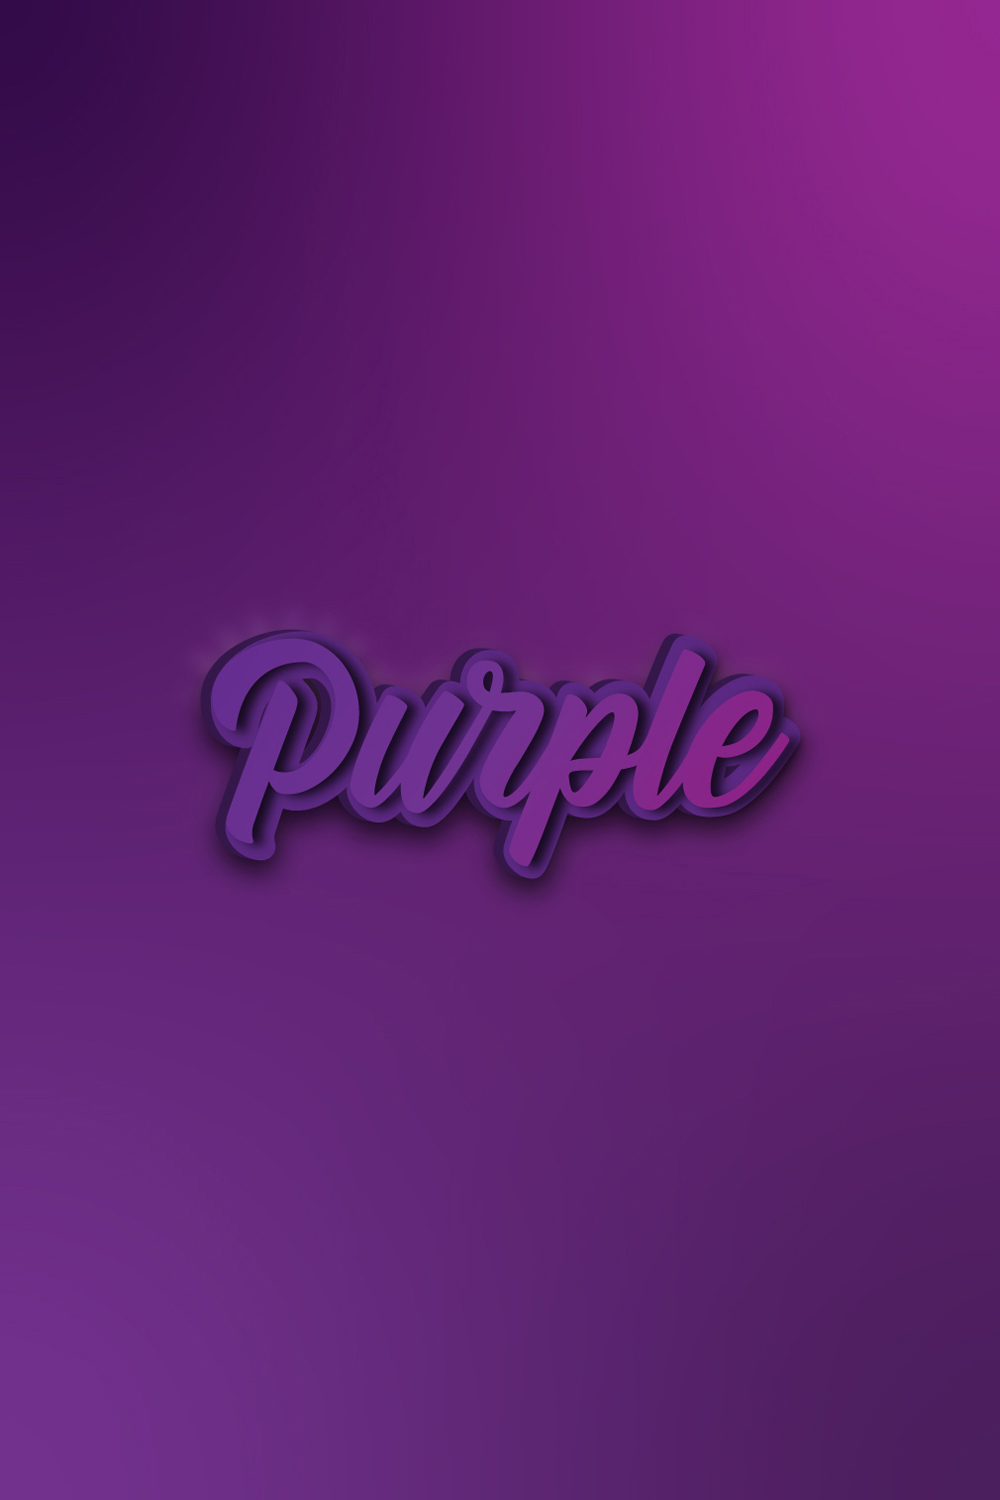 Purple text that says purple on the bottom editable text effect, text, 3d purple eps text effect, style 3d purple text effect,t purple 3d editable text effect, 3d purple psd text, purple 3d text style effect, pinterest preview image.